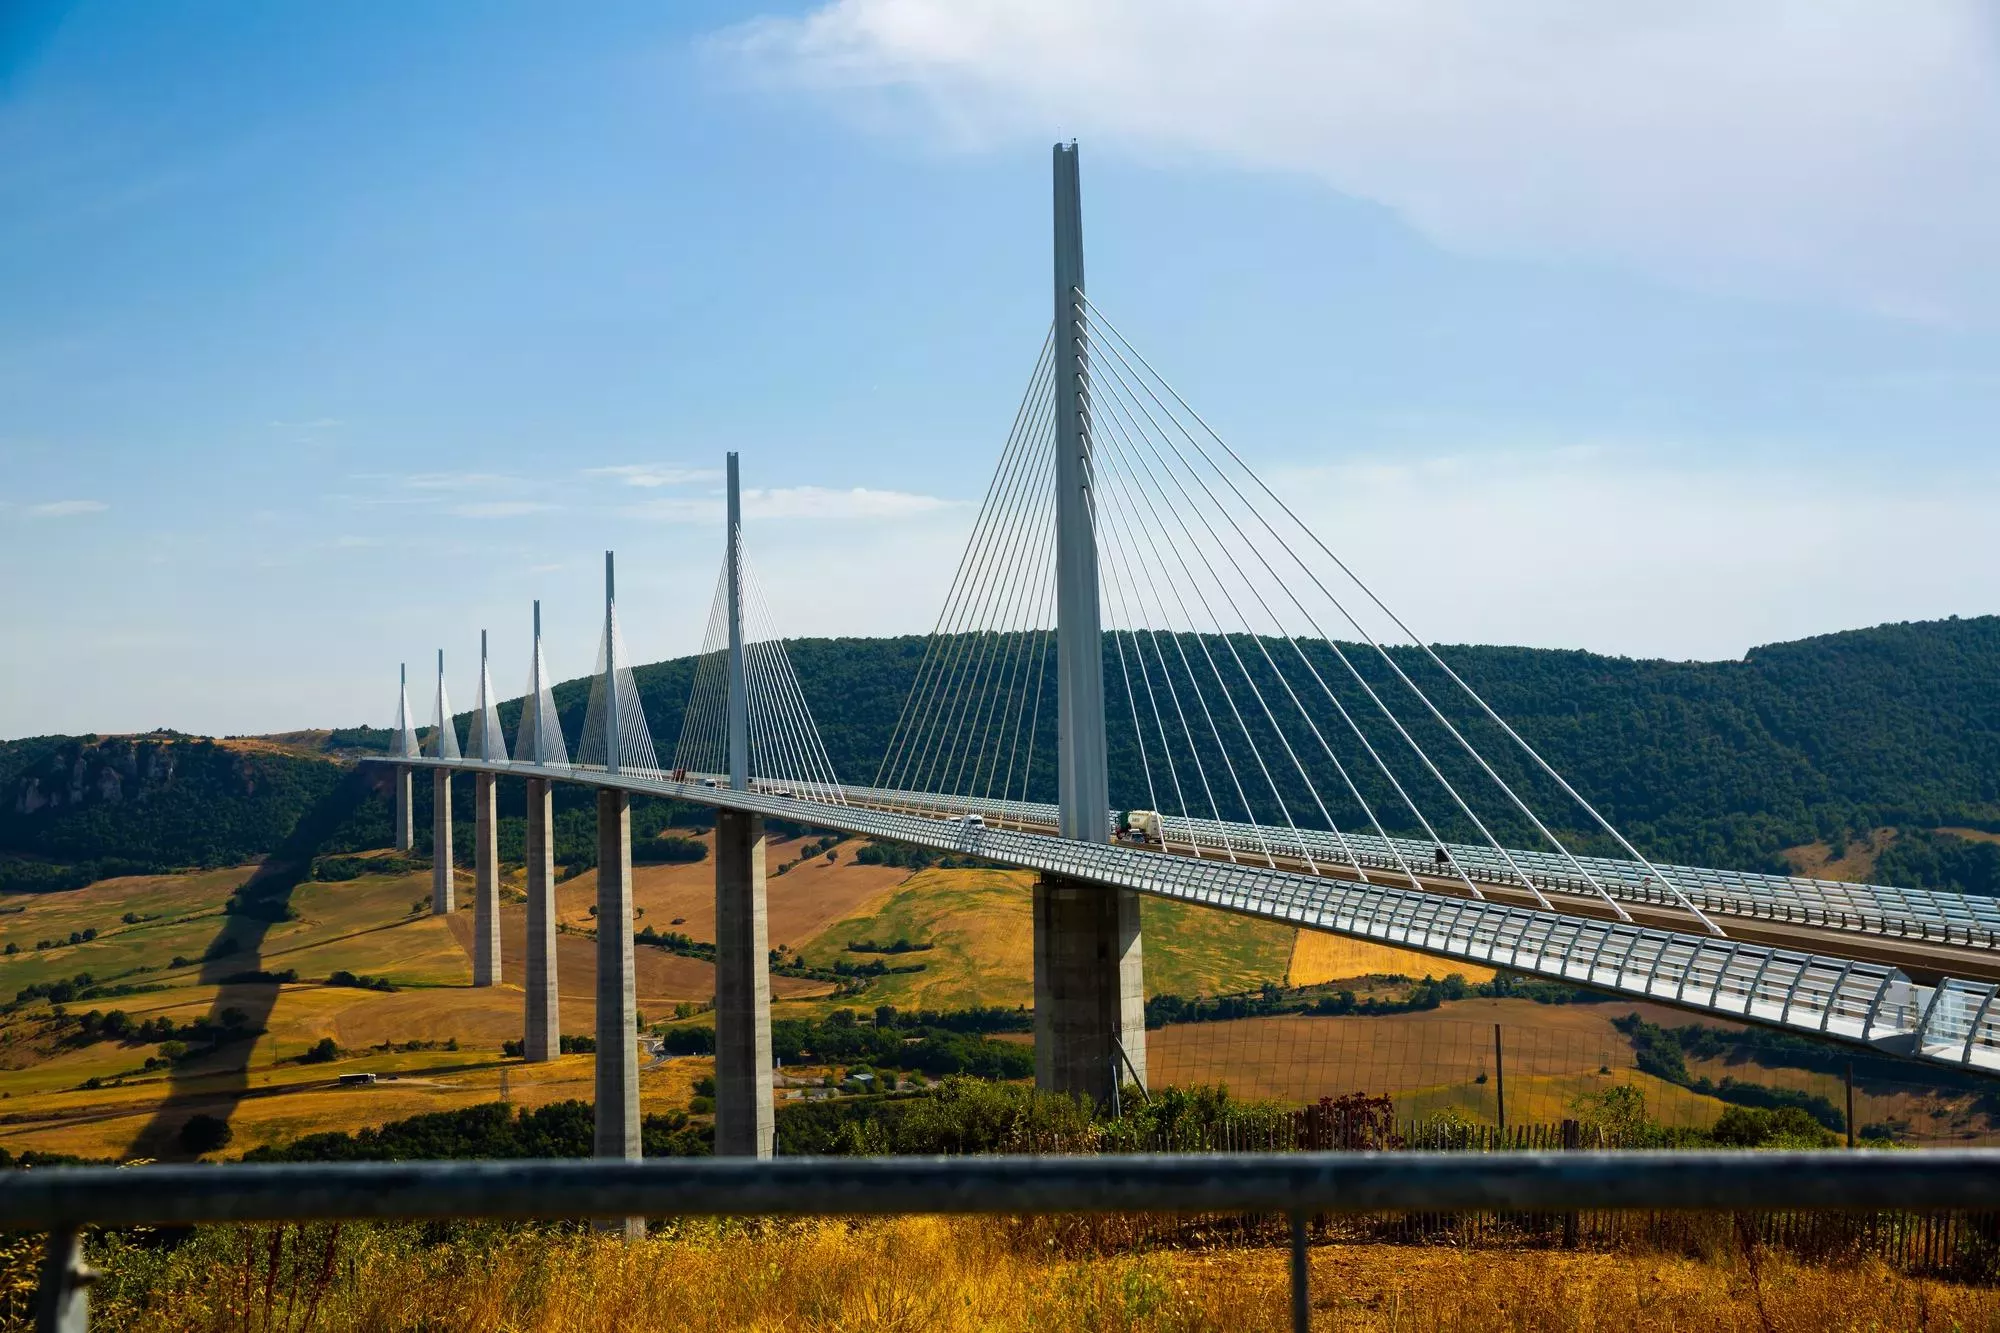 Summer view of Millau Viaduct, multi-span cable-stayed bridge in France